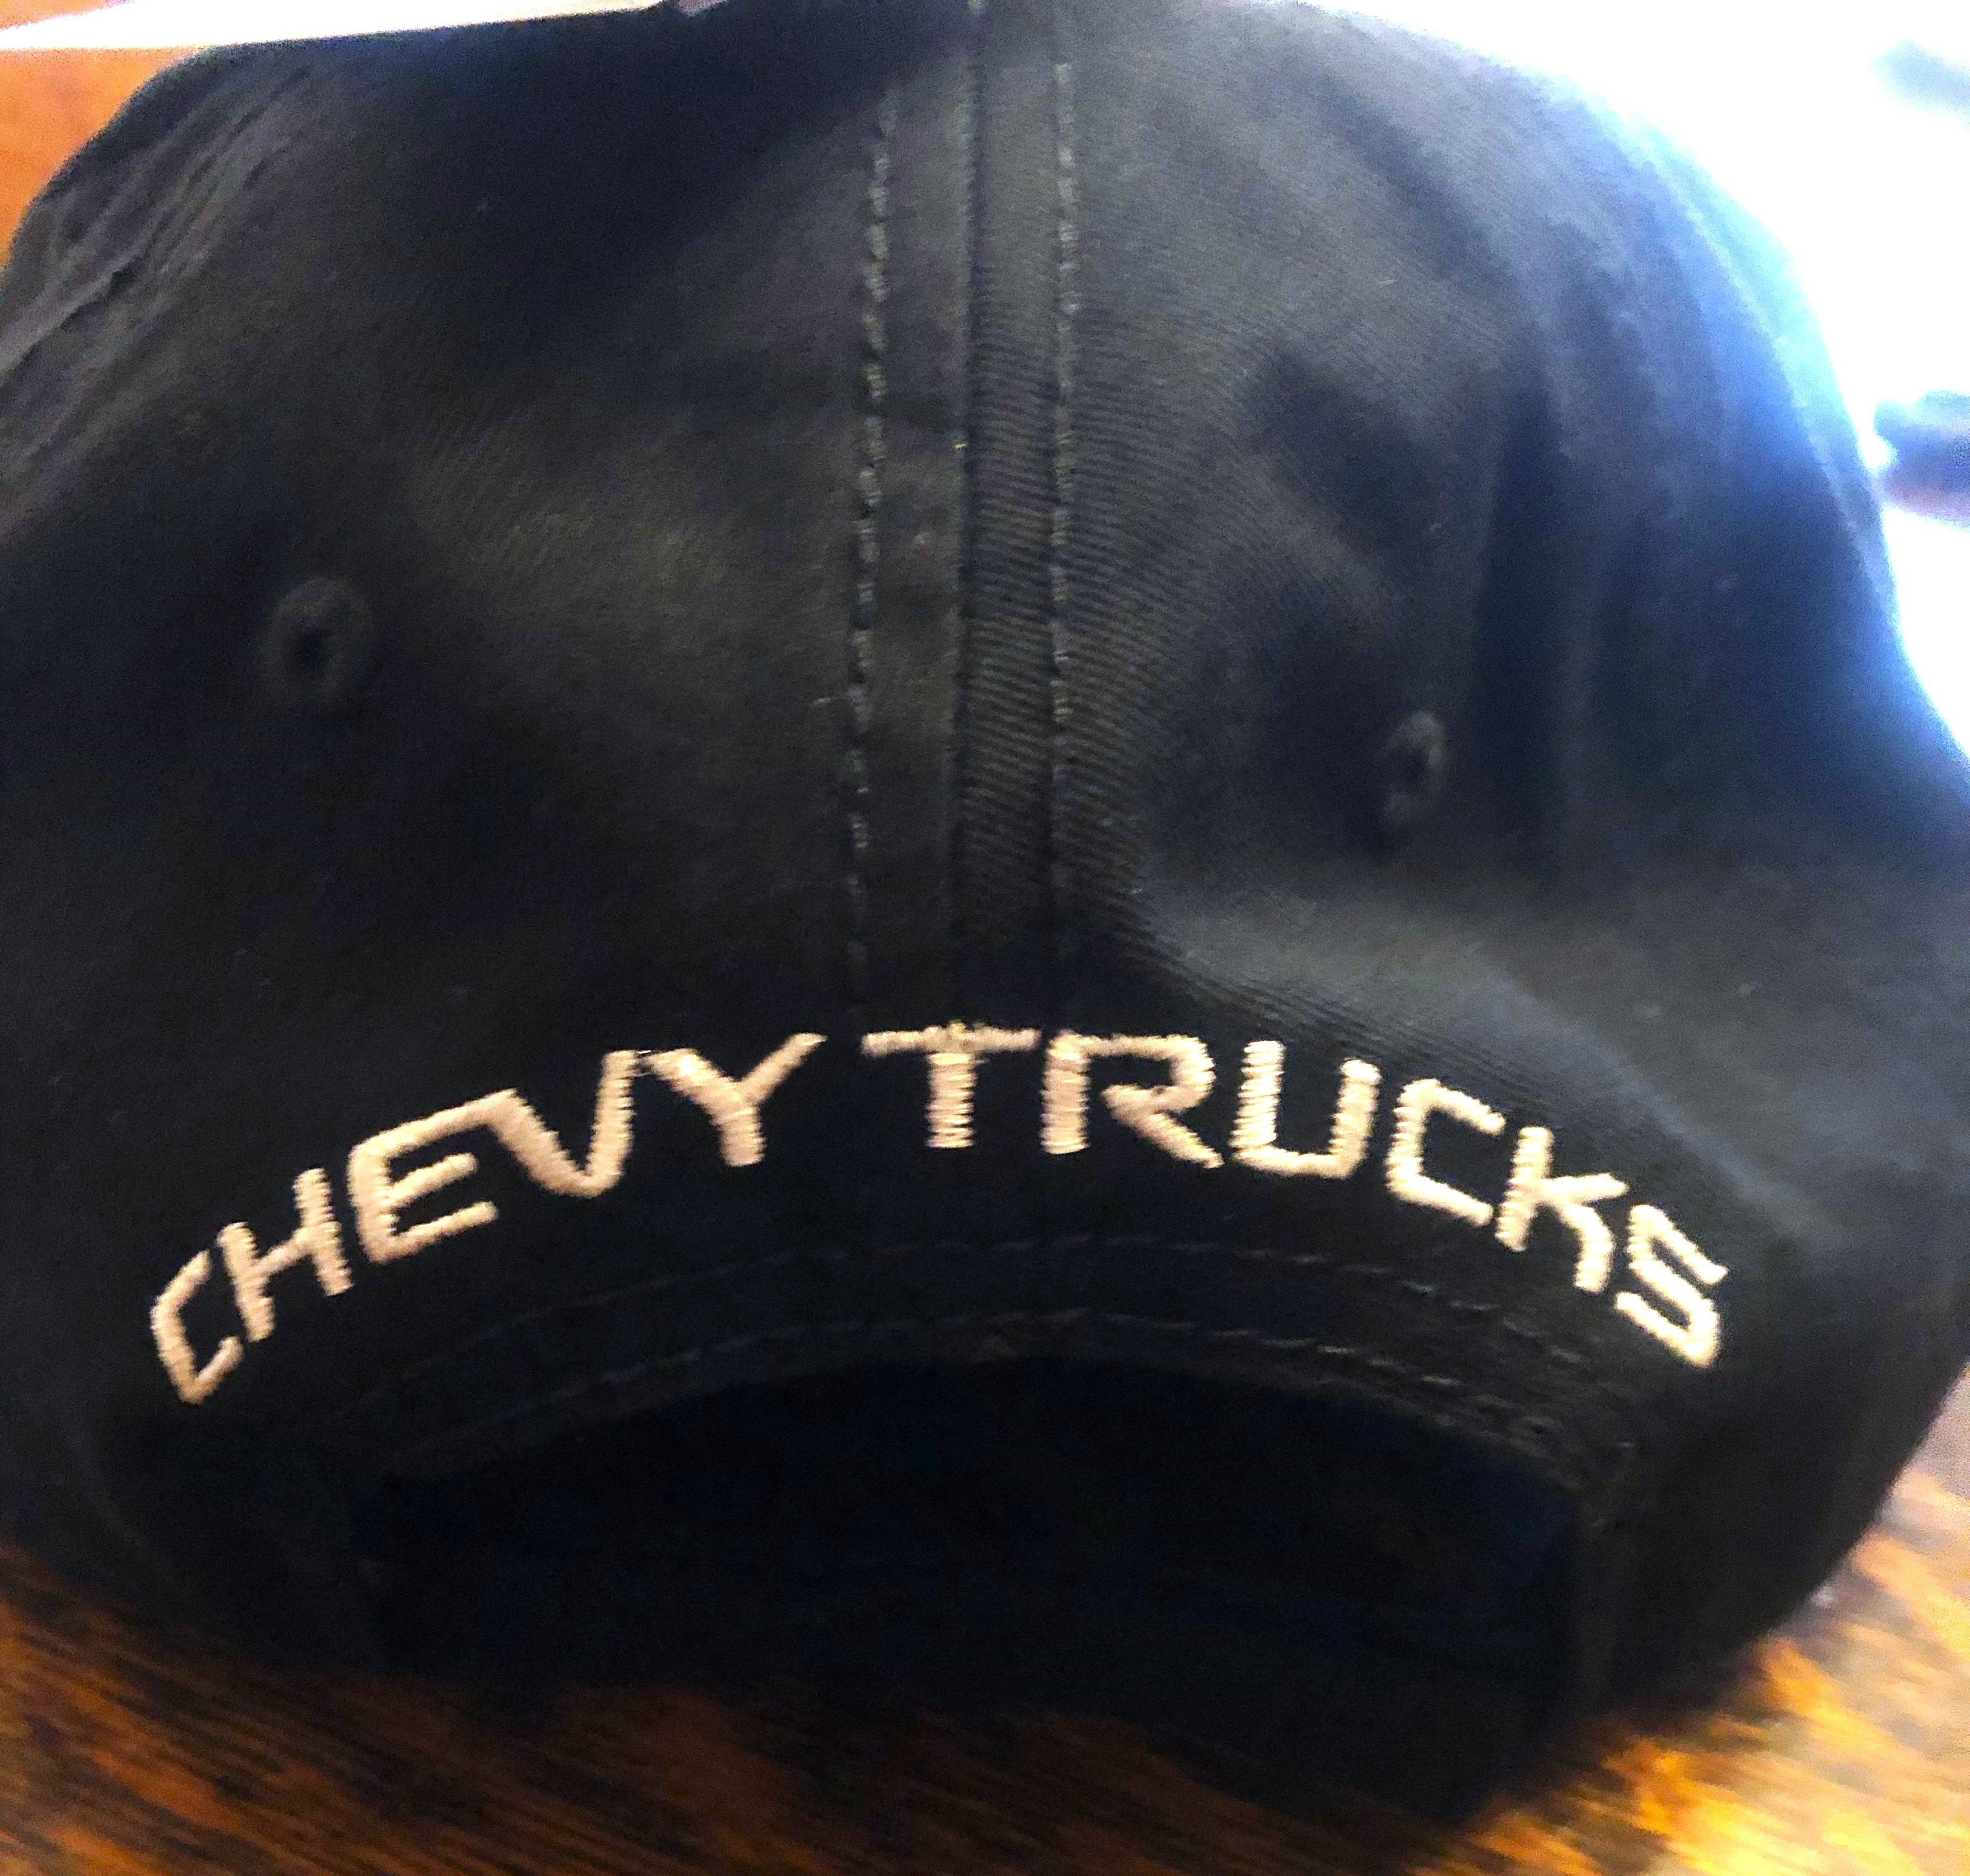 Official Chevy "Bow Tie" emblem ball cap